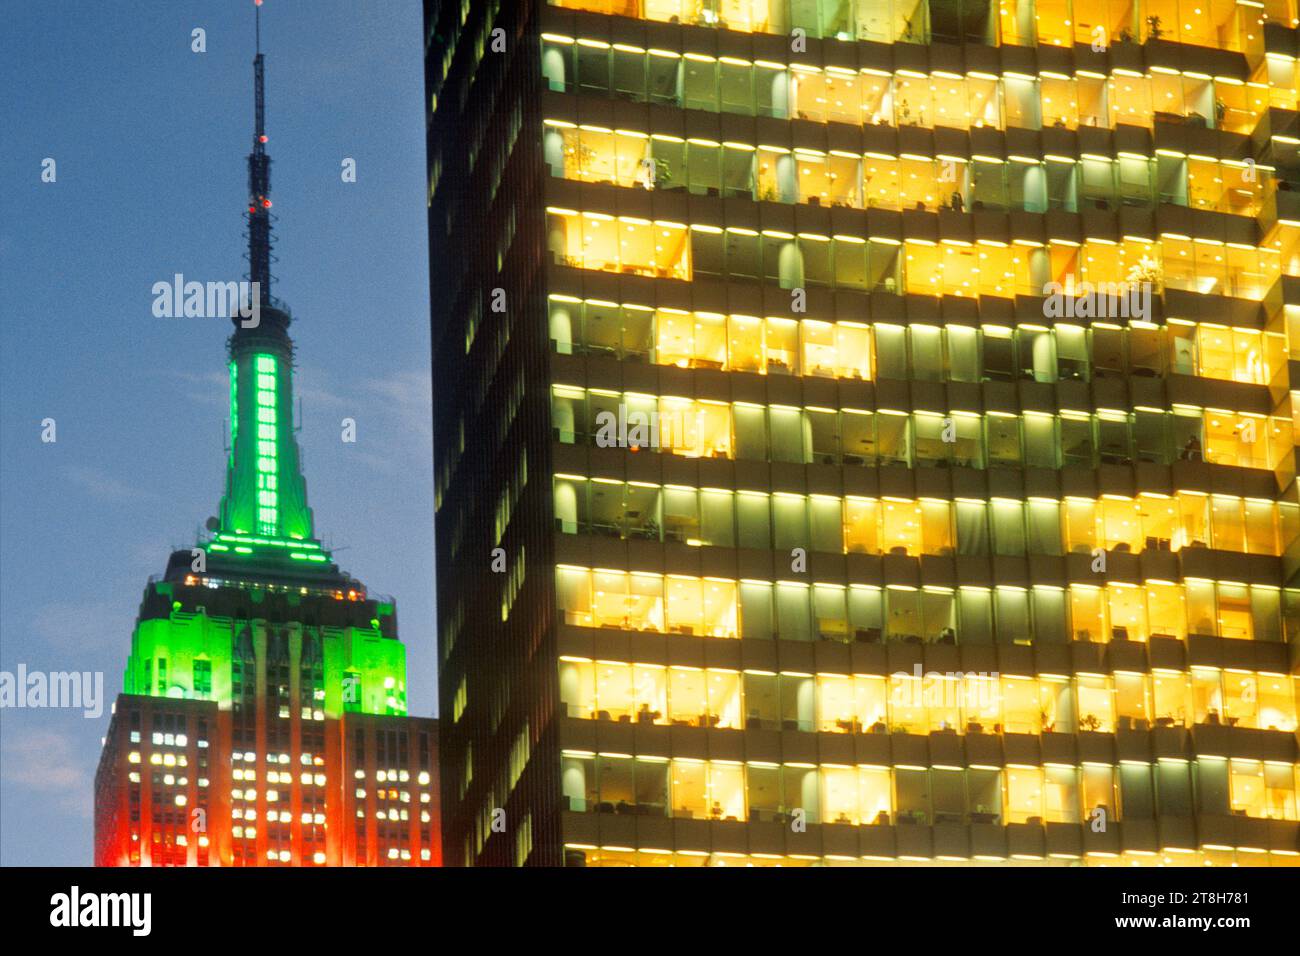 Empire State Building Christmas lights at night or dusk. New York City Midtown Manhattan office building skyscrapers illuminated on Fifth Avenue. USA Stock Photo